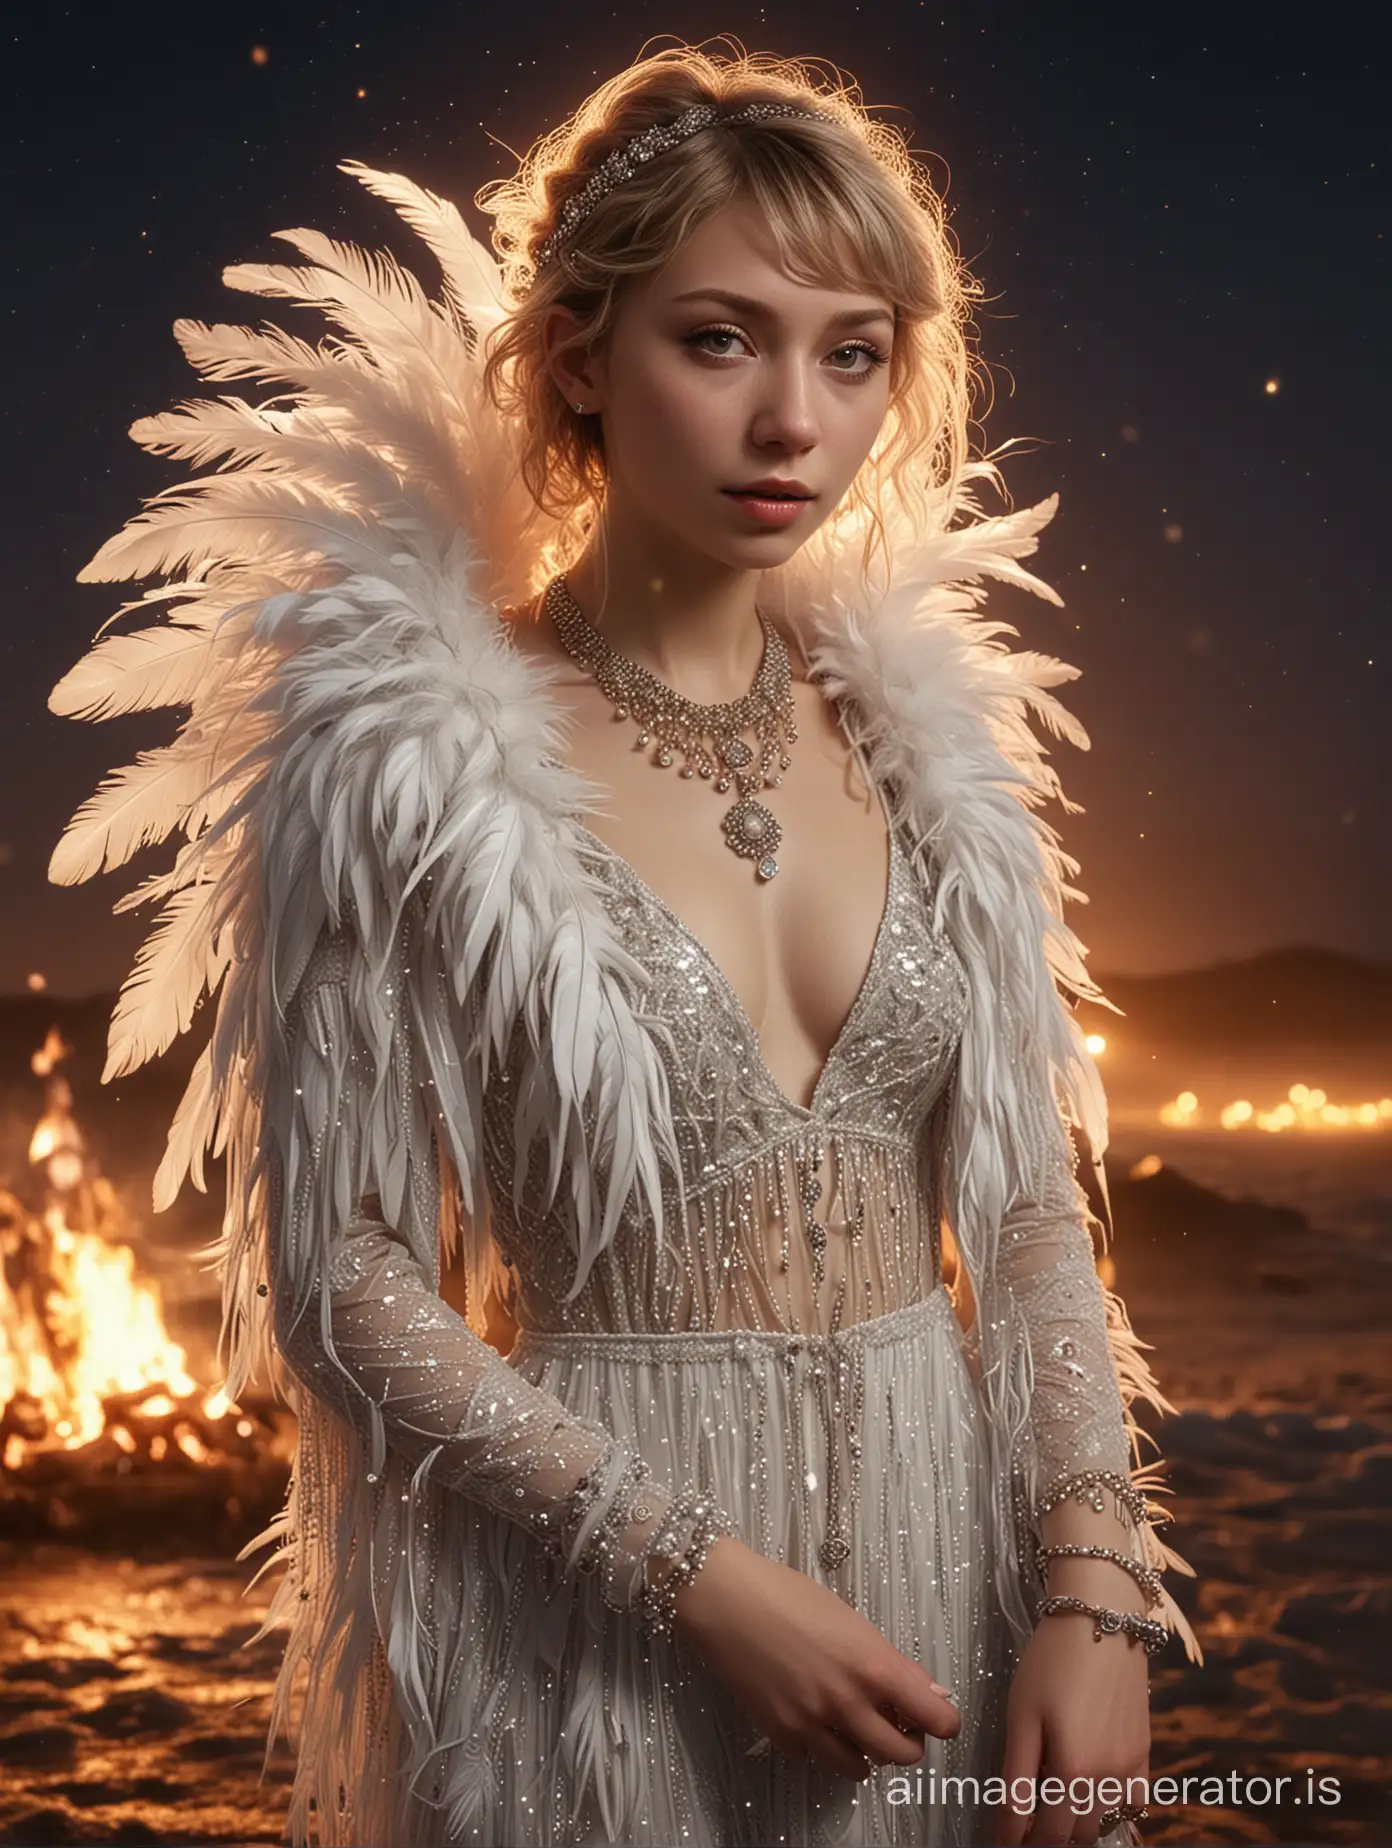 Tavi-Gevinson-Dances-with-Feathers-and-Jewelry-on-Beach-at-Night-by-Fire